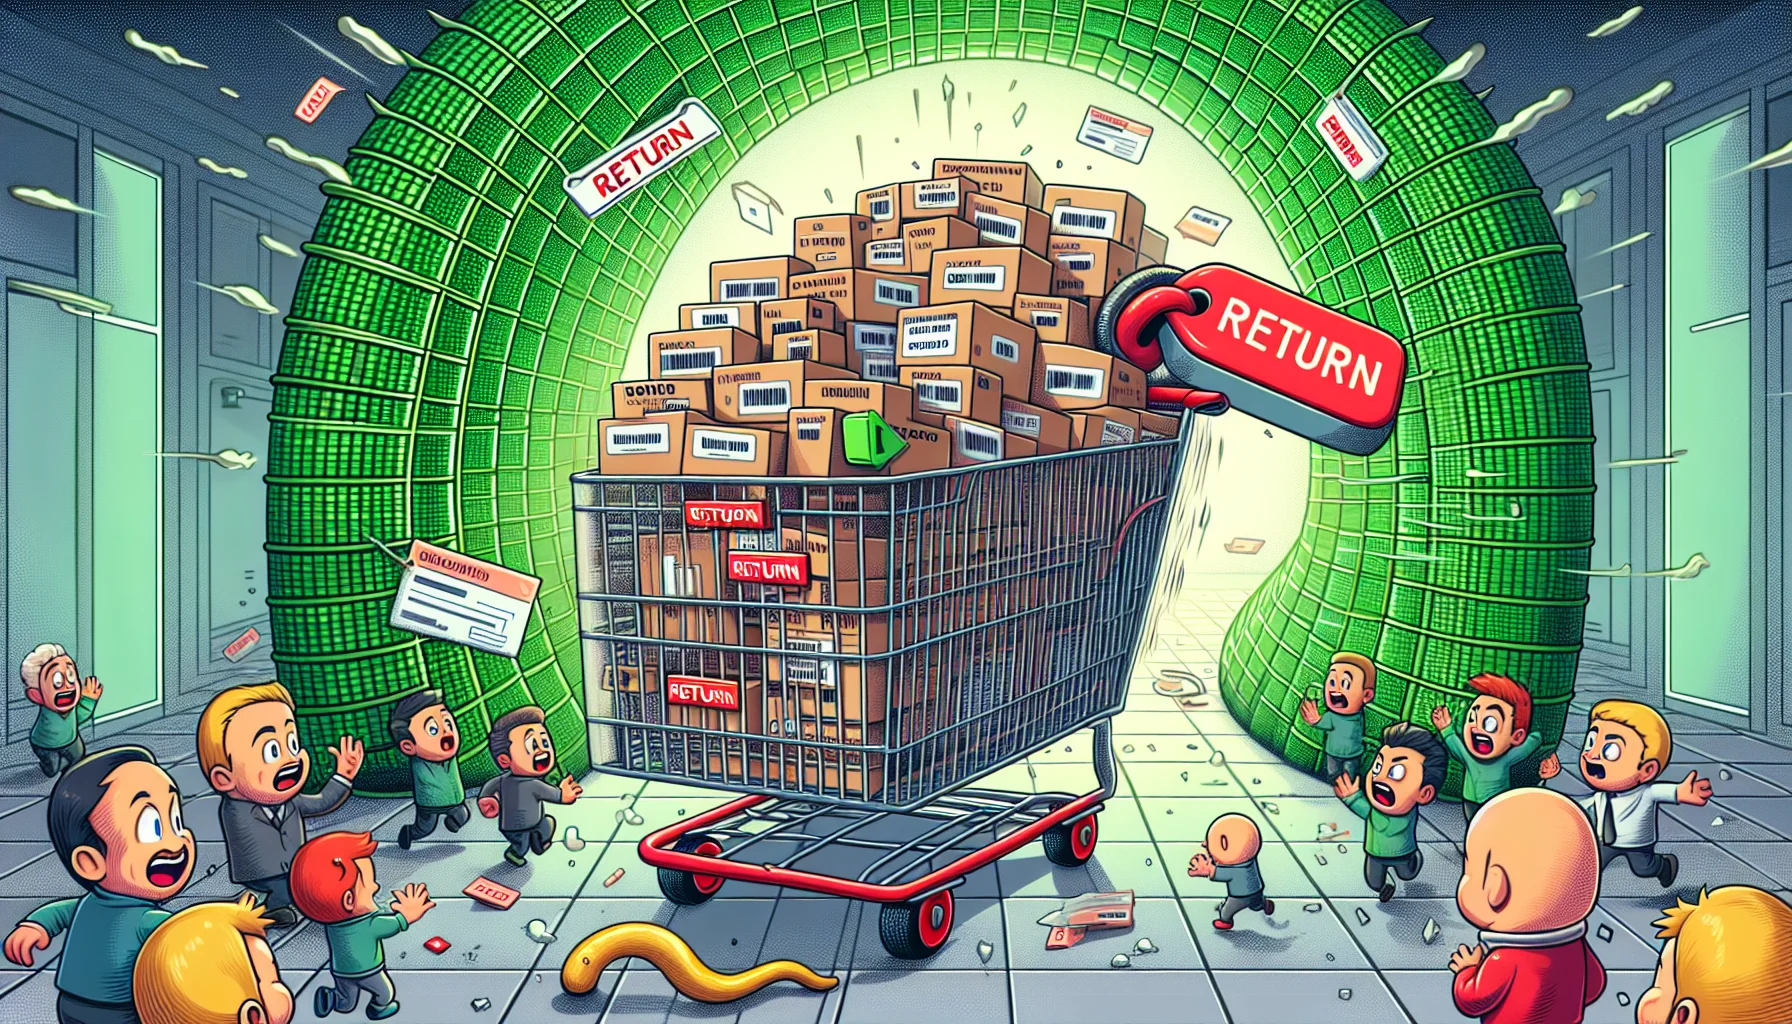 Create a humorous and attraction-grabbing scene related to a web hosting refund policy. Imagine a gigantic shopping cart on wheels flying through a heavily pixelated cyberspace tunnel, filled to the brim with domain names and web hosting packages, each tagged with a price tag. An oversized green RETURN button attached to a mega rubber band pulls the cart back into a store-like setting, with a comically large, red REJECTED stamp looming above, while a small group of laughing cartoon characters representing various ethnicities watches the scene unfold.